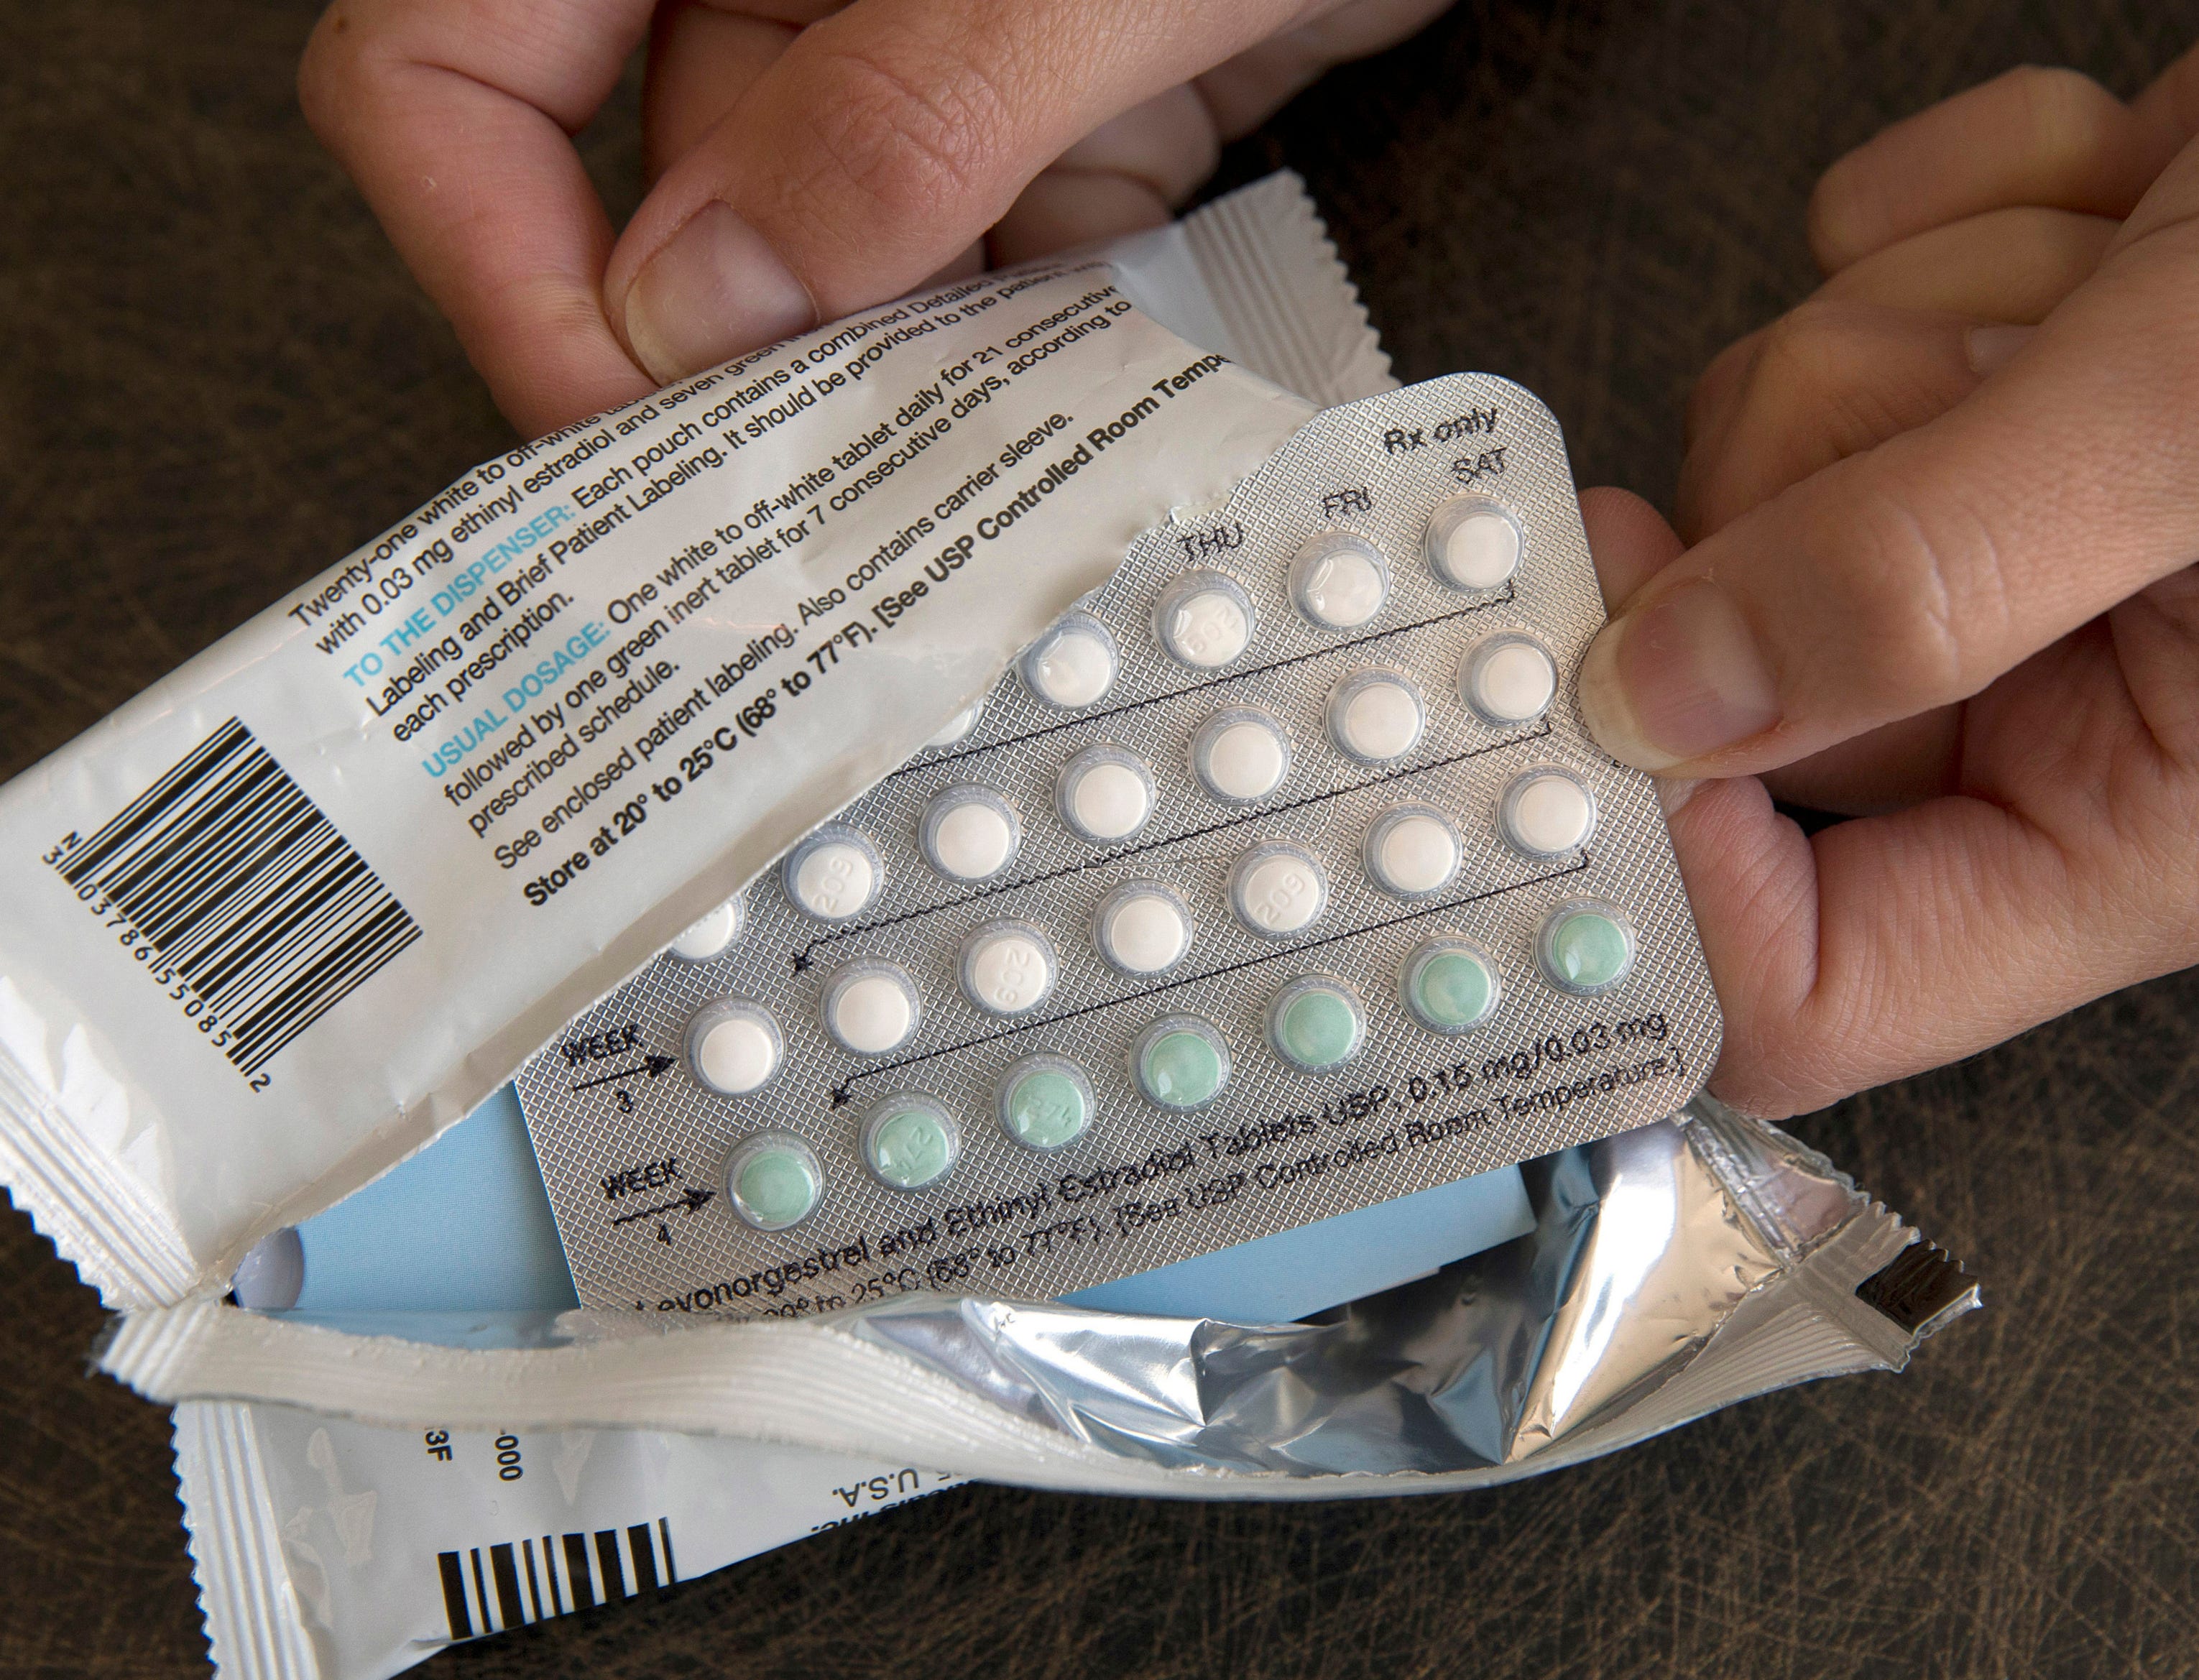 How to Spot Fake Birth Control Pills